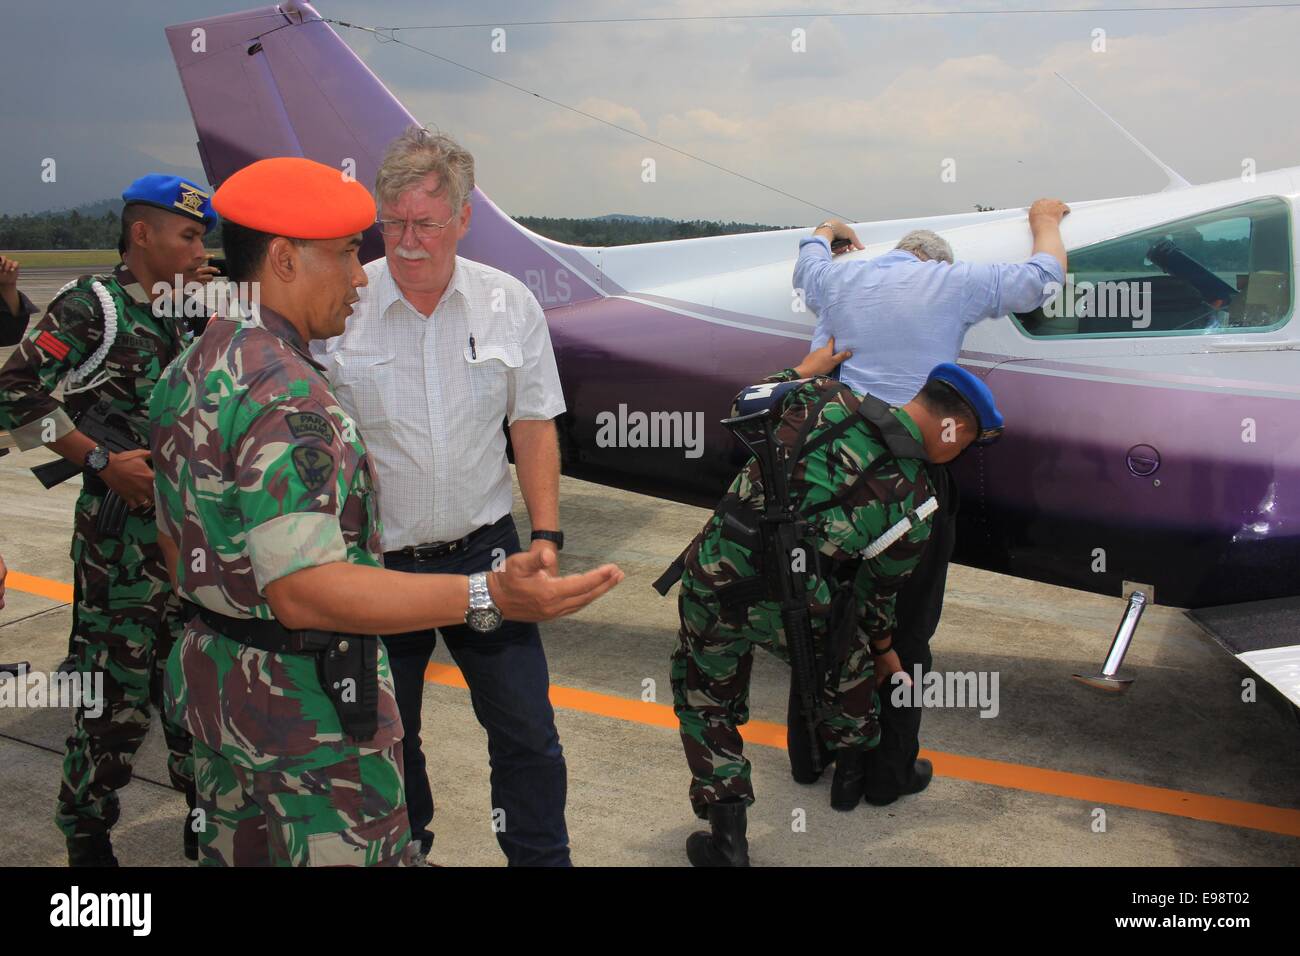 Manado, Indonesia. 22nd Oct, 2014. Indonesia air force check Beech Craft plane from Australia with captain's name was Graeme Paul Jackline, the co pilot was Richard Wayne Maclean after being forced down by Indonesia Sukhoi fighter jets at Sam Ratulangi airport on October 22, 2014 in Manado, North Sulawesi, Indonesia. A spokesman for the Indonesian air force, First Air Marshal Hadi Tjahjanto, said the civilian plane was detected this morning by radar off southern Maluku in eastern Indonesia. Credit:  ZUMA Press, Inc./Alamy Live News Stock Photo